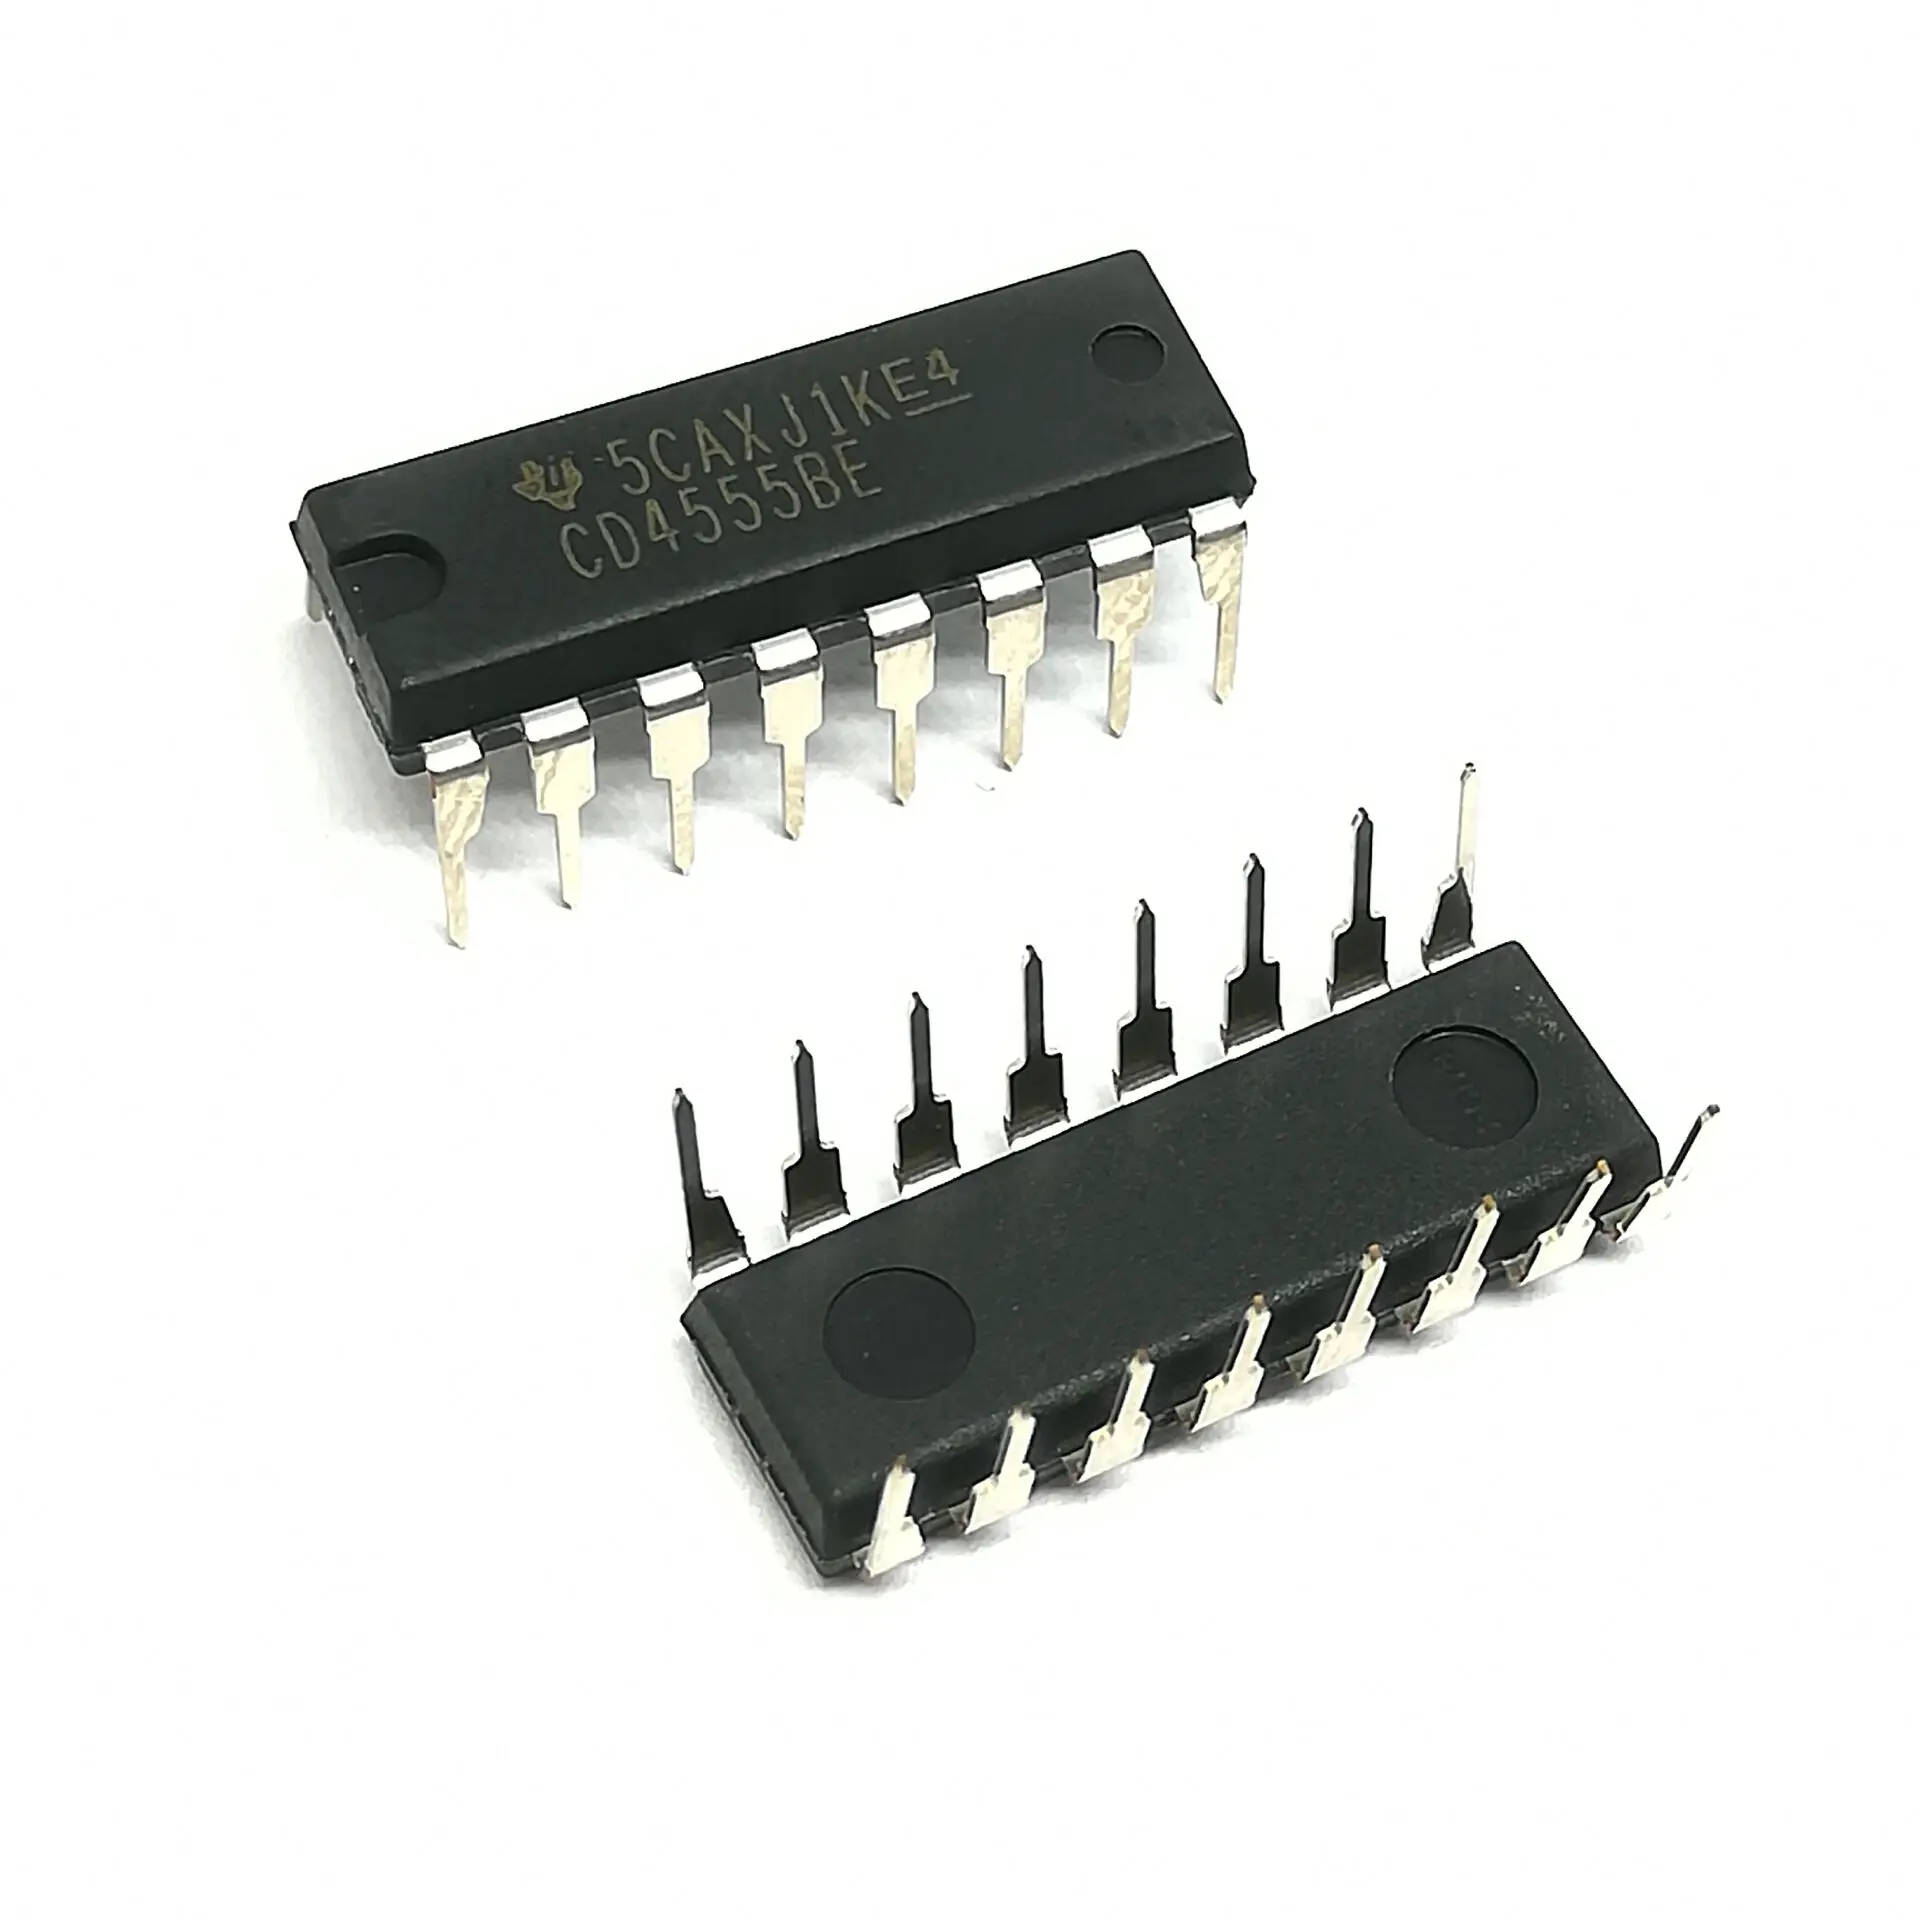 
Merrillchip New Original in stock IC Electronic components integrated circuit CD4555BE 